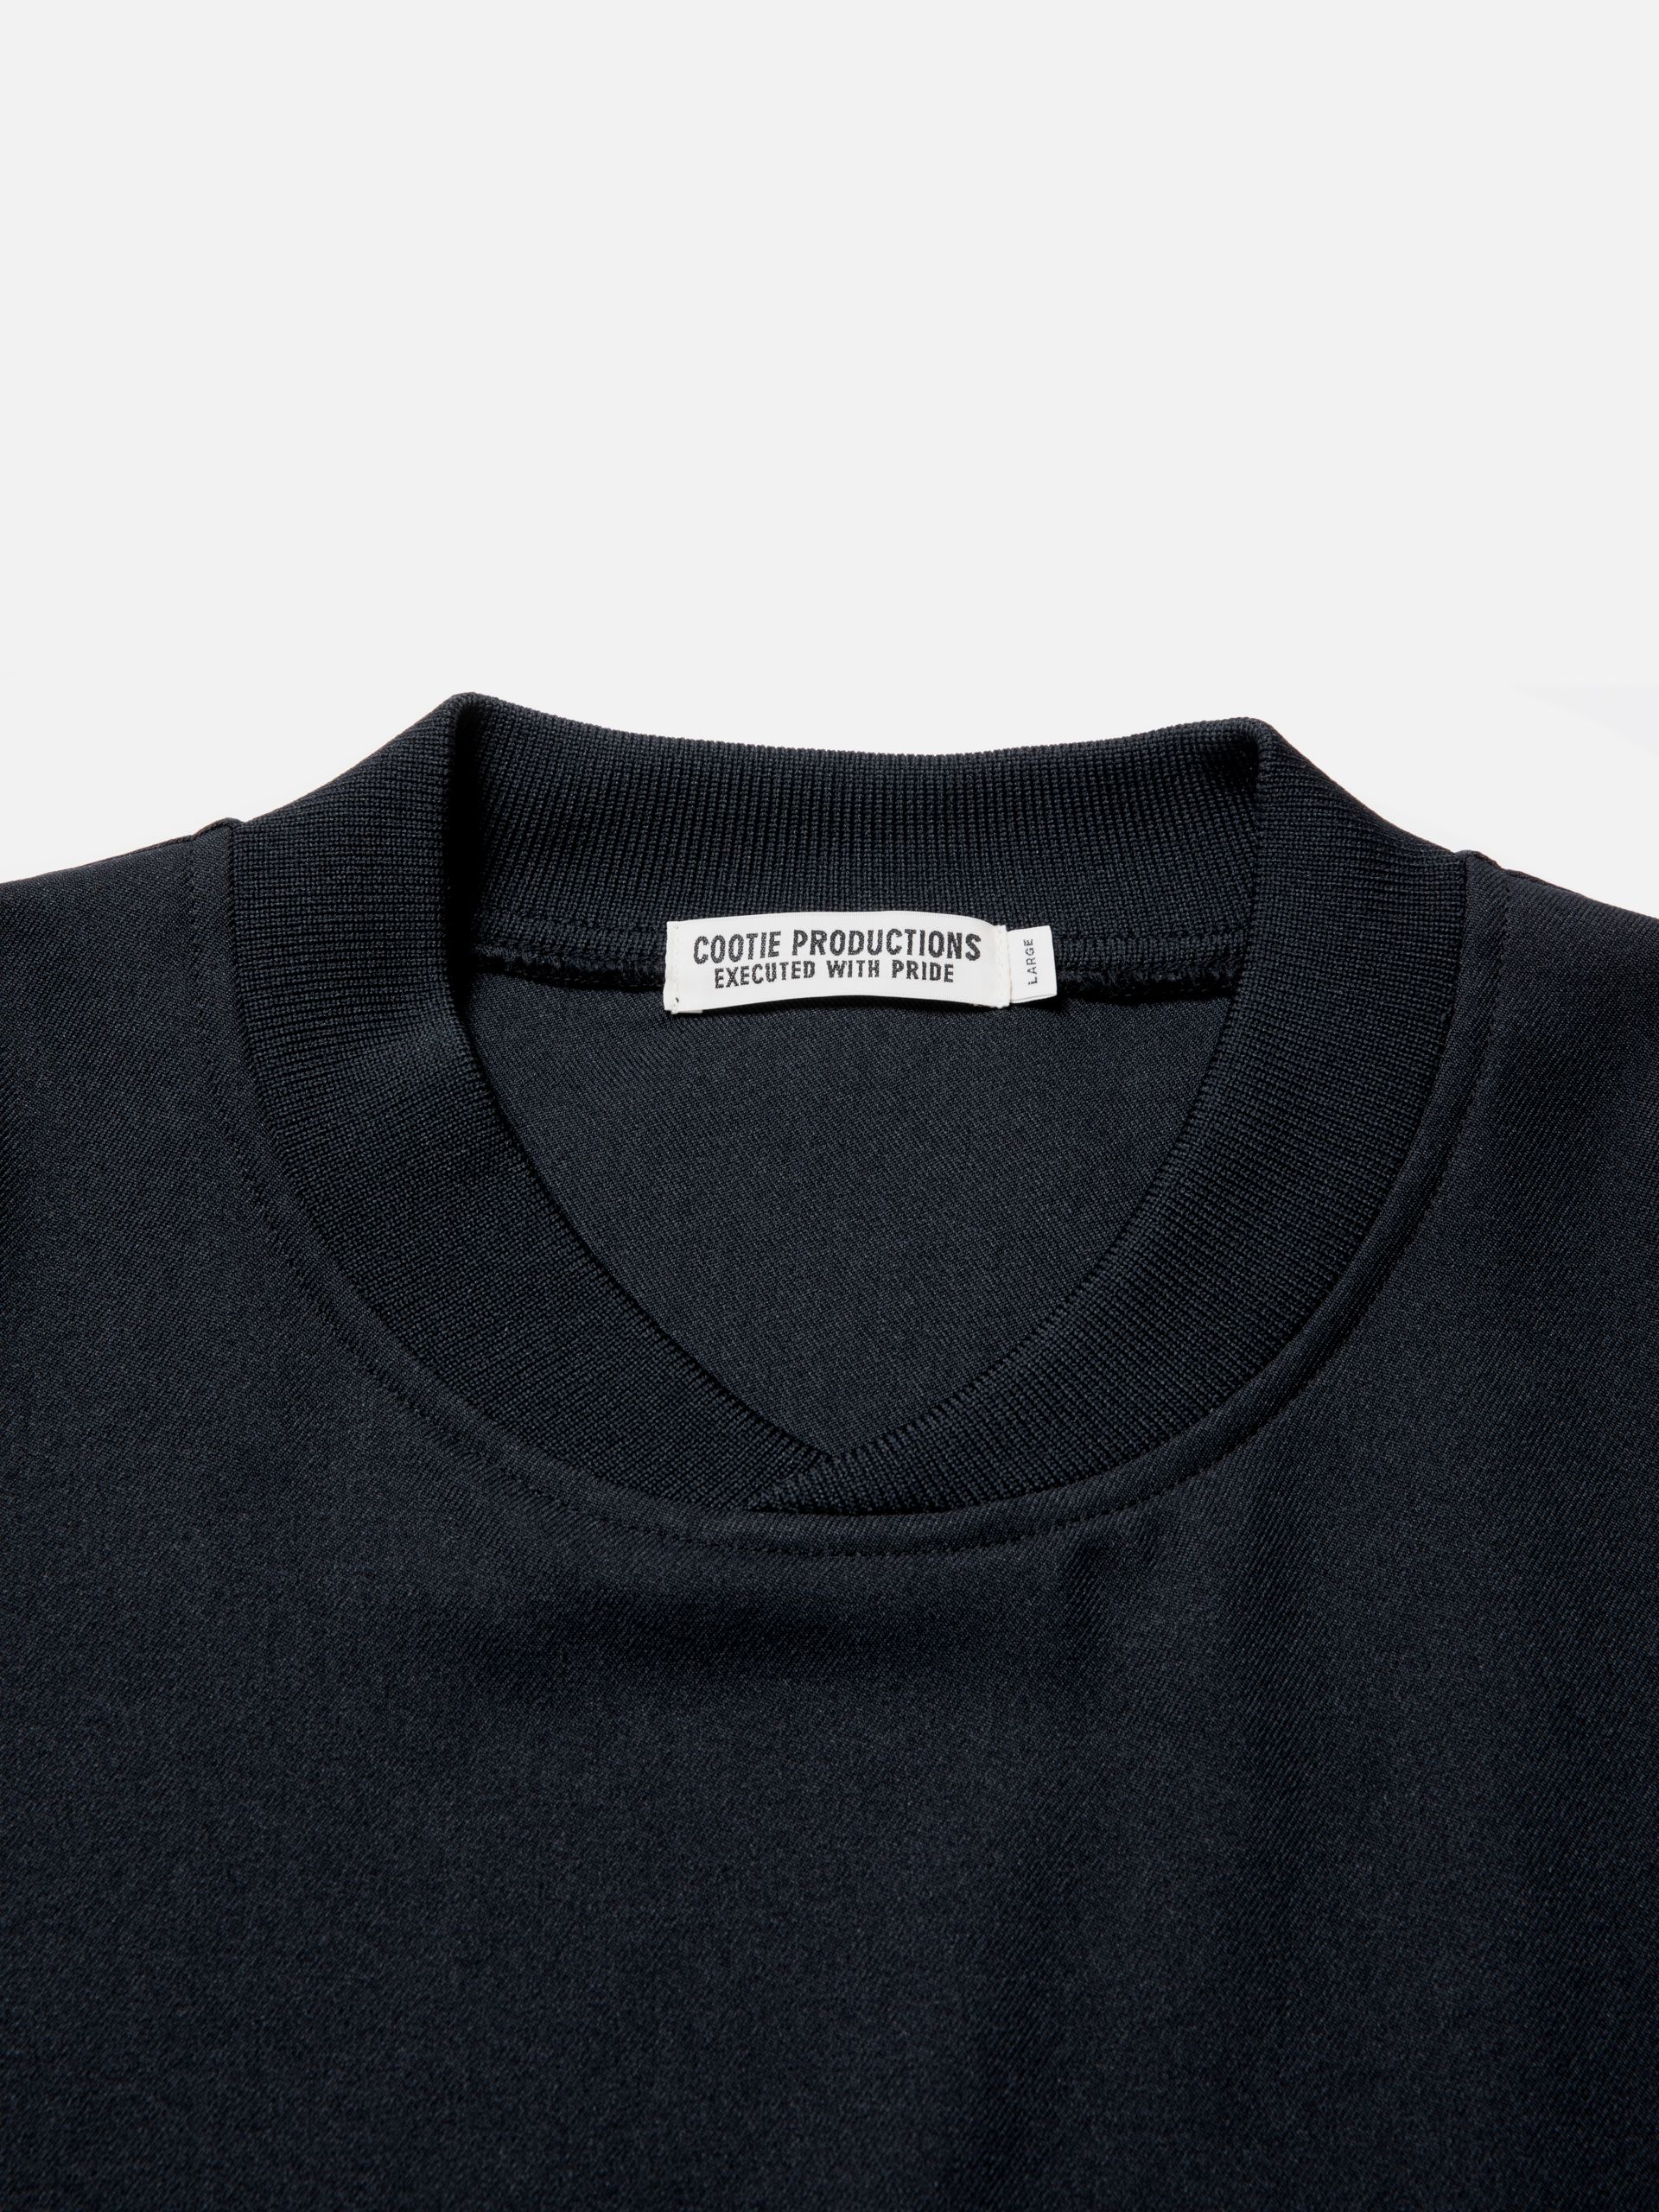 COOTIE / Polyester Twill Football L/S Tee